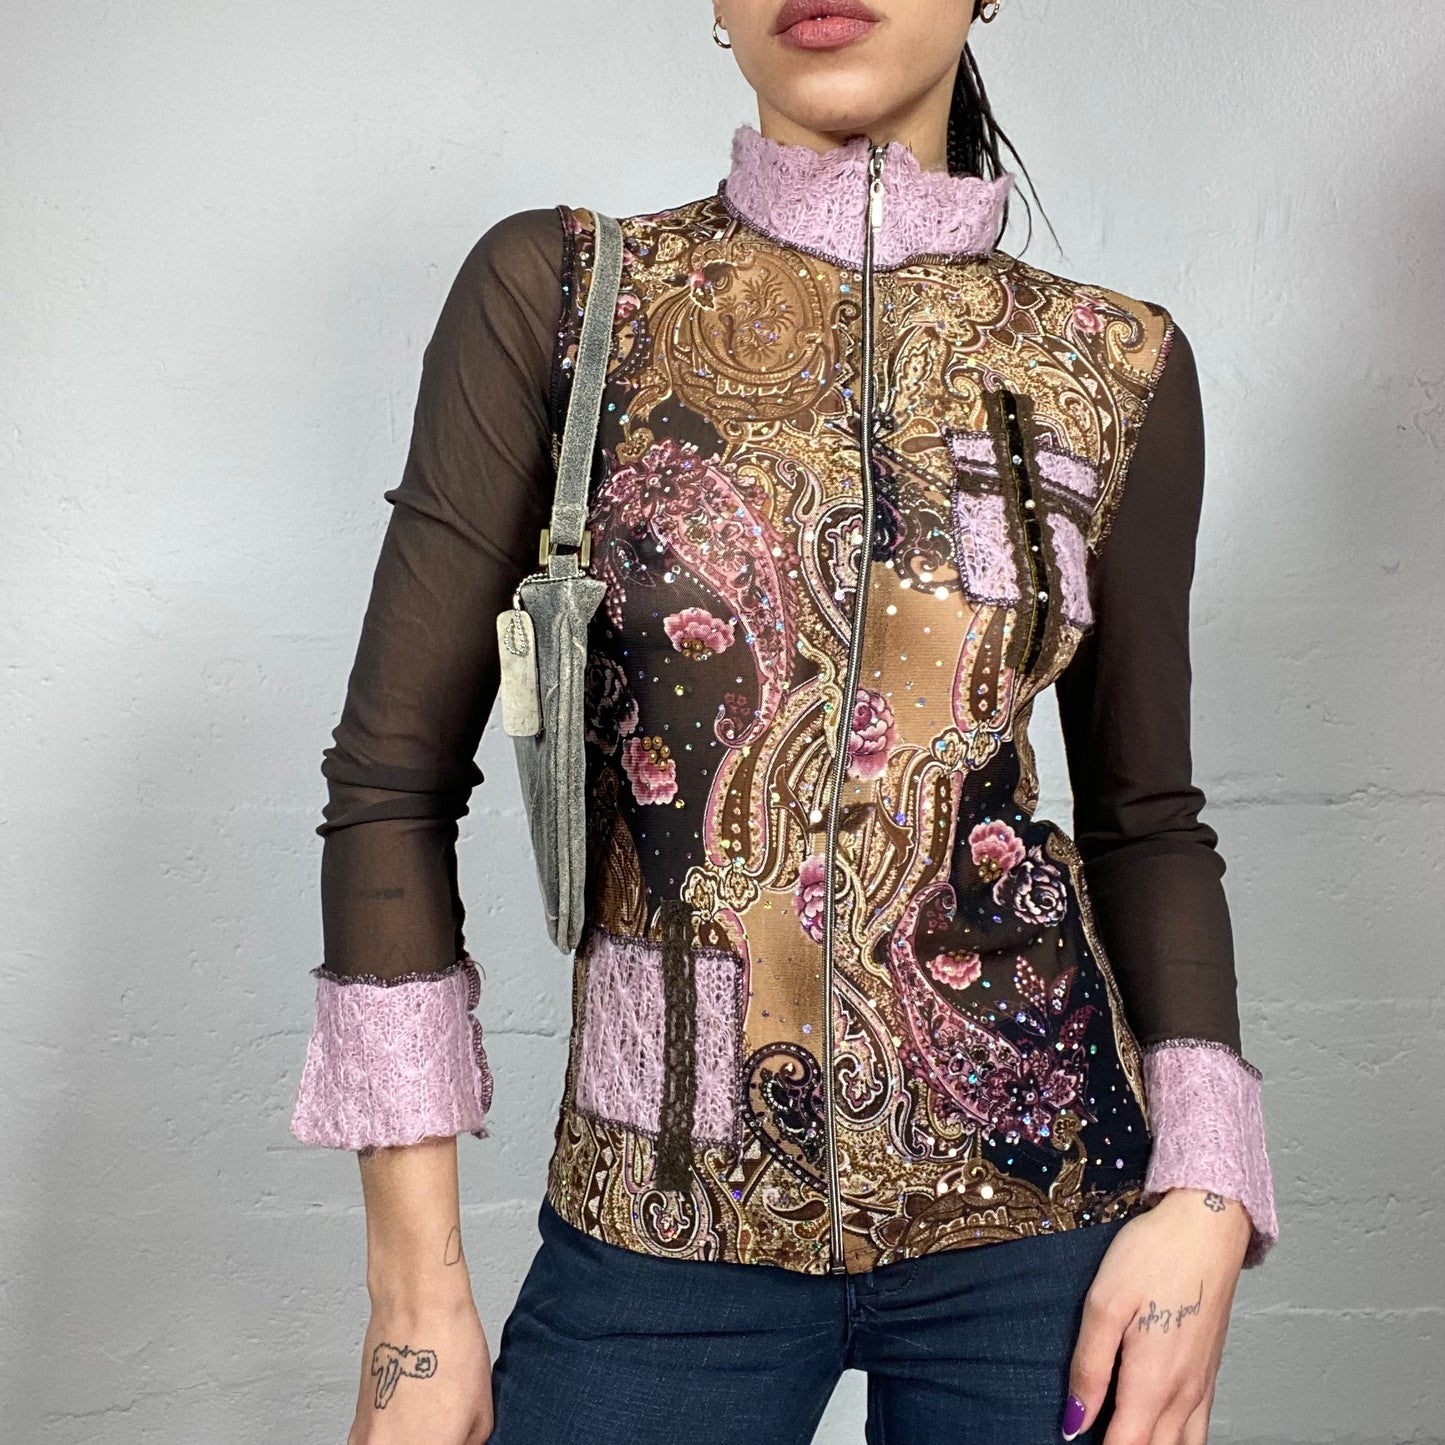 Vintage 2000's Hippie Pink and Brown Zip Up Sweater with Knitted Patches and Floral Print with Strass Detail (S)